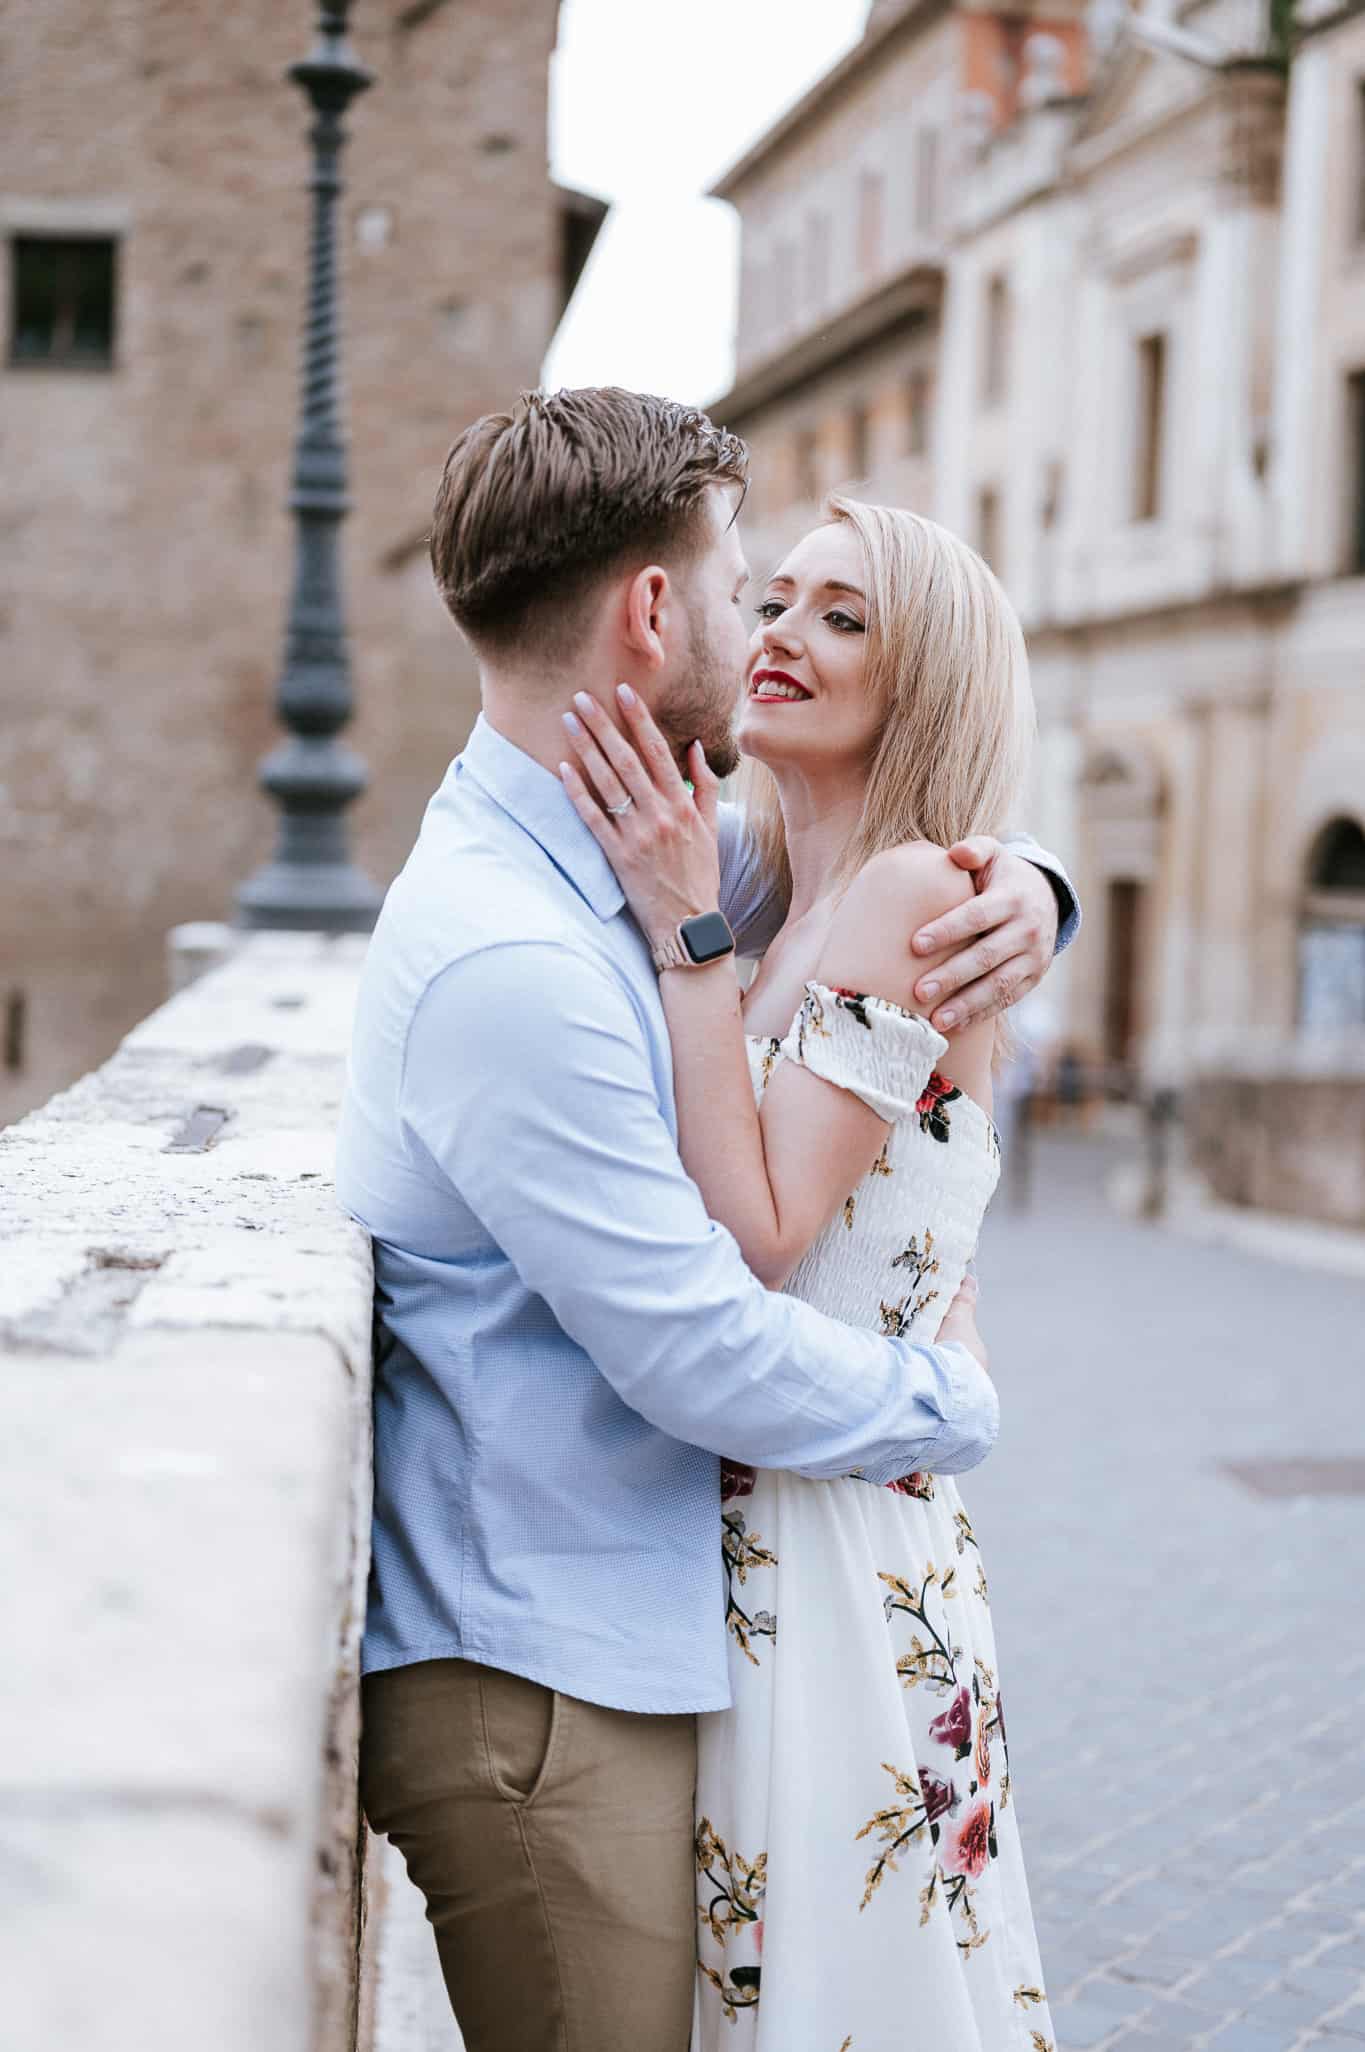 Couple sharing a romantic moment on the Tiber island in Rome Italy